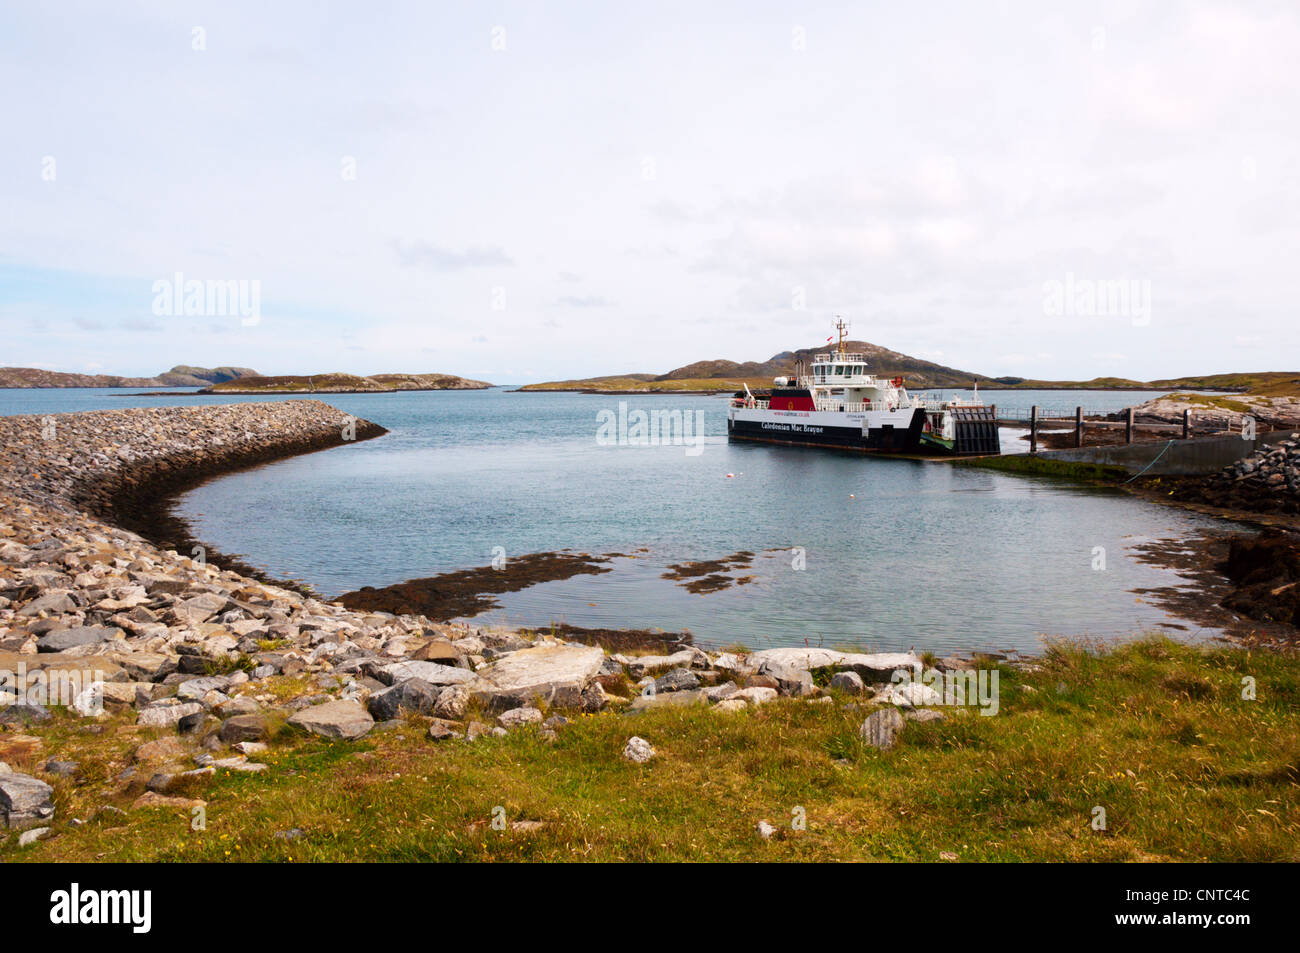 The Caledonian MacBrayne ferry, MV Loch Alainn, at the Àird Mhòr slipway on the island of Barra in the Outer Hebrides. Stock Photo